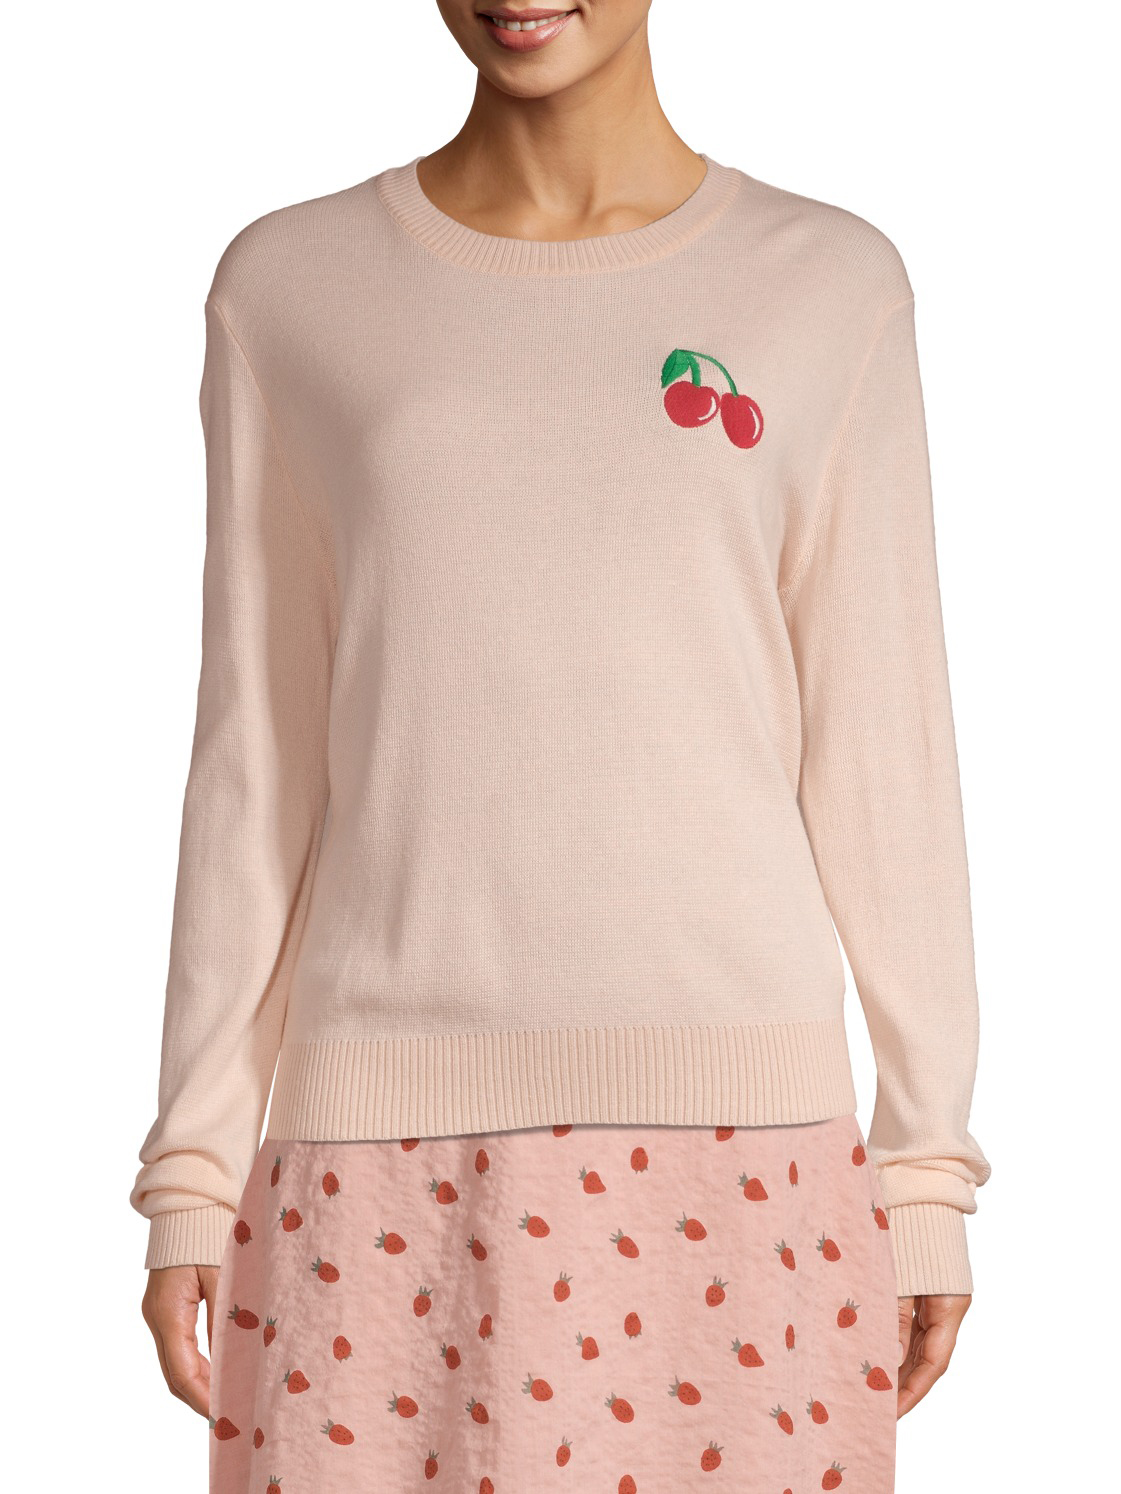 Love Sadie Women's Embroidered Sweater - image 1 of 7